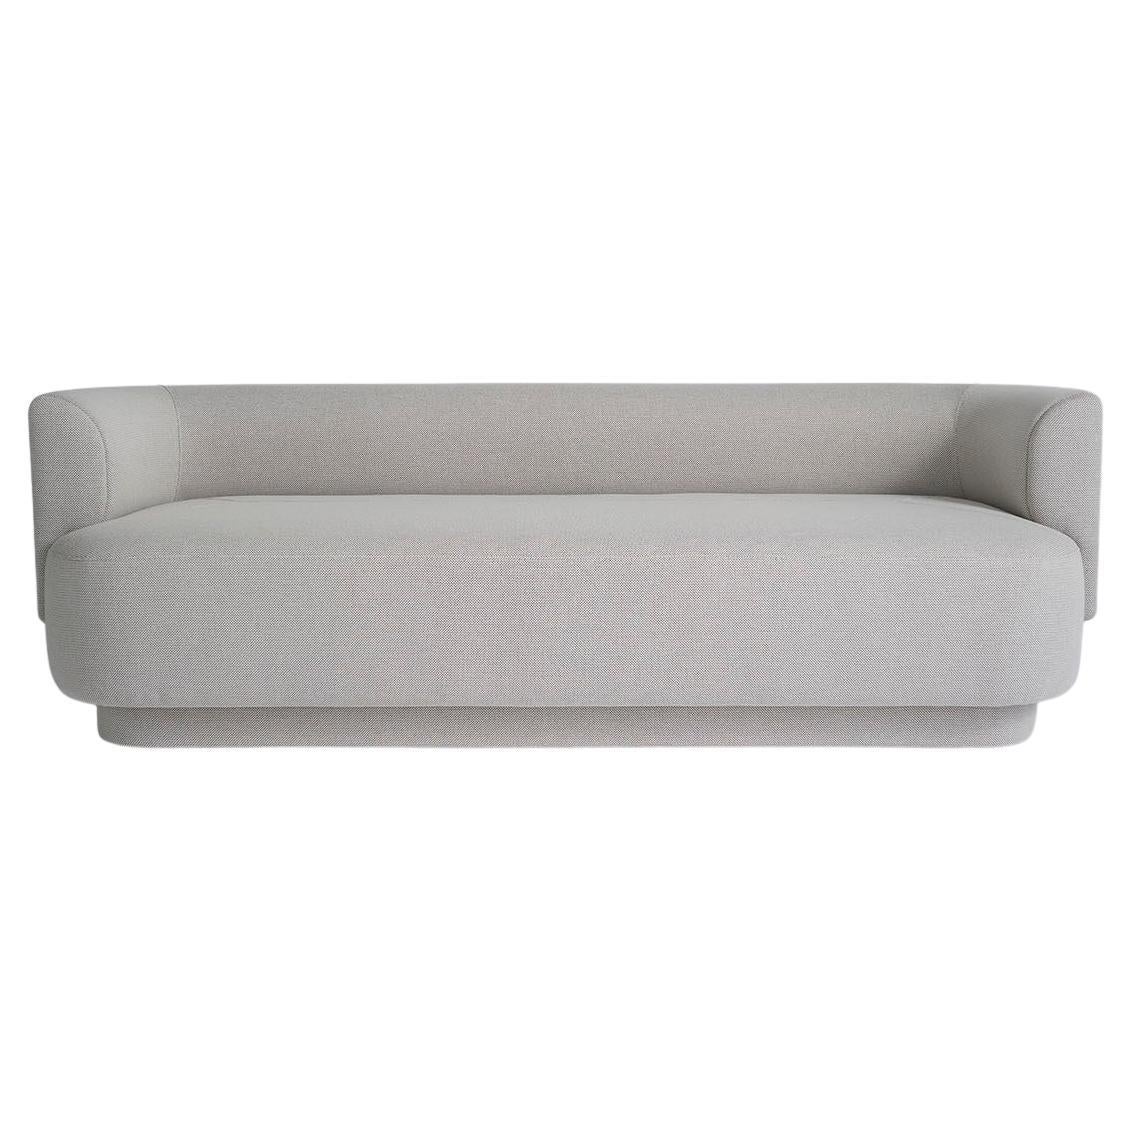 Capper Sofa by Phase Design, Fabric For Sale